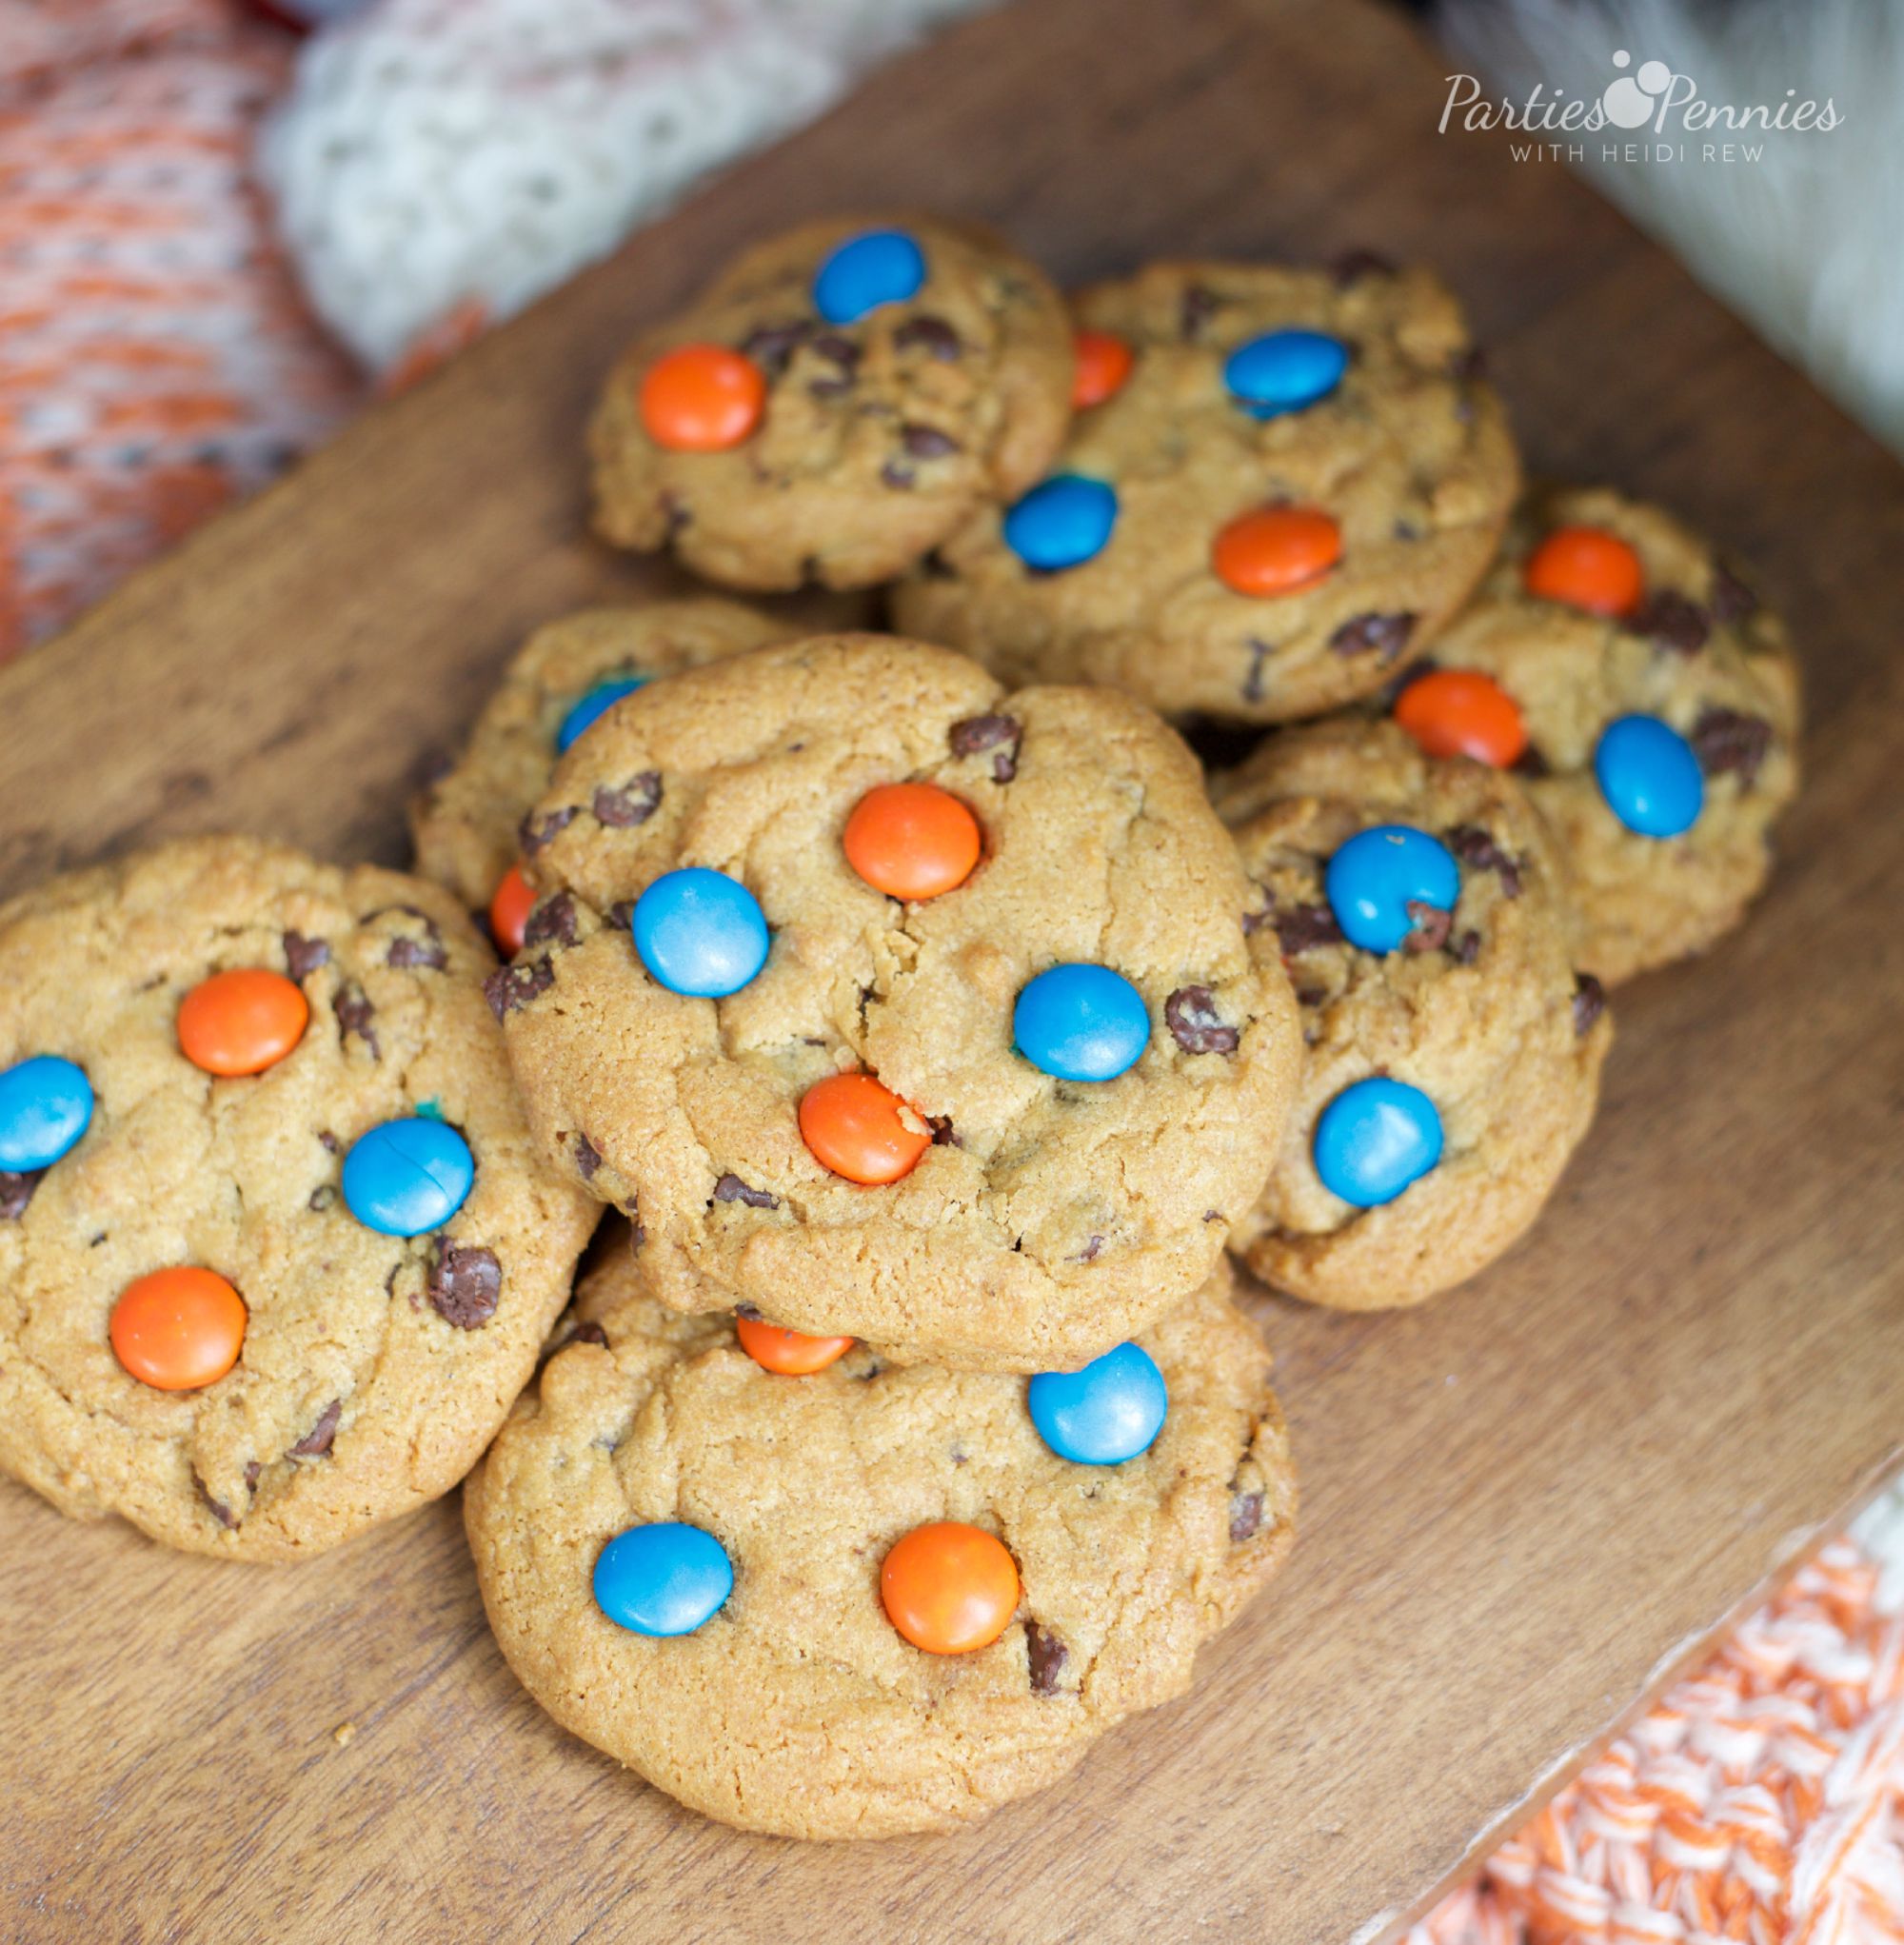 Coca-Cola Fall Football Sam's Club | How to Throw a Tailgate Party | School Color Cookies | PartiesforPennies.com | #tailgate #floridagators #universityofflorida #shareyourspirit 